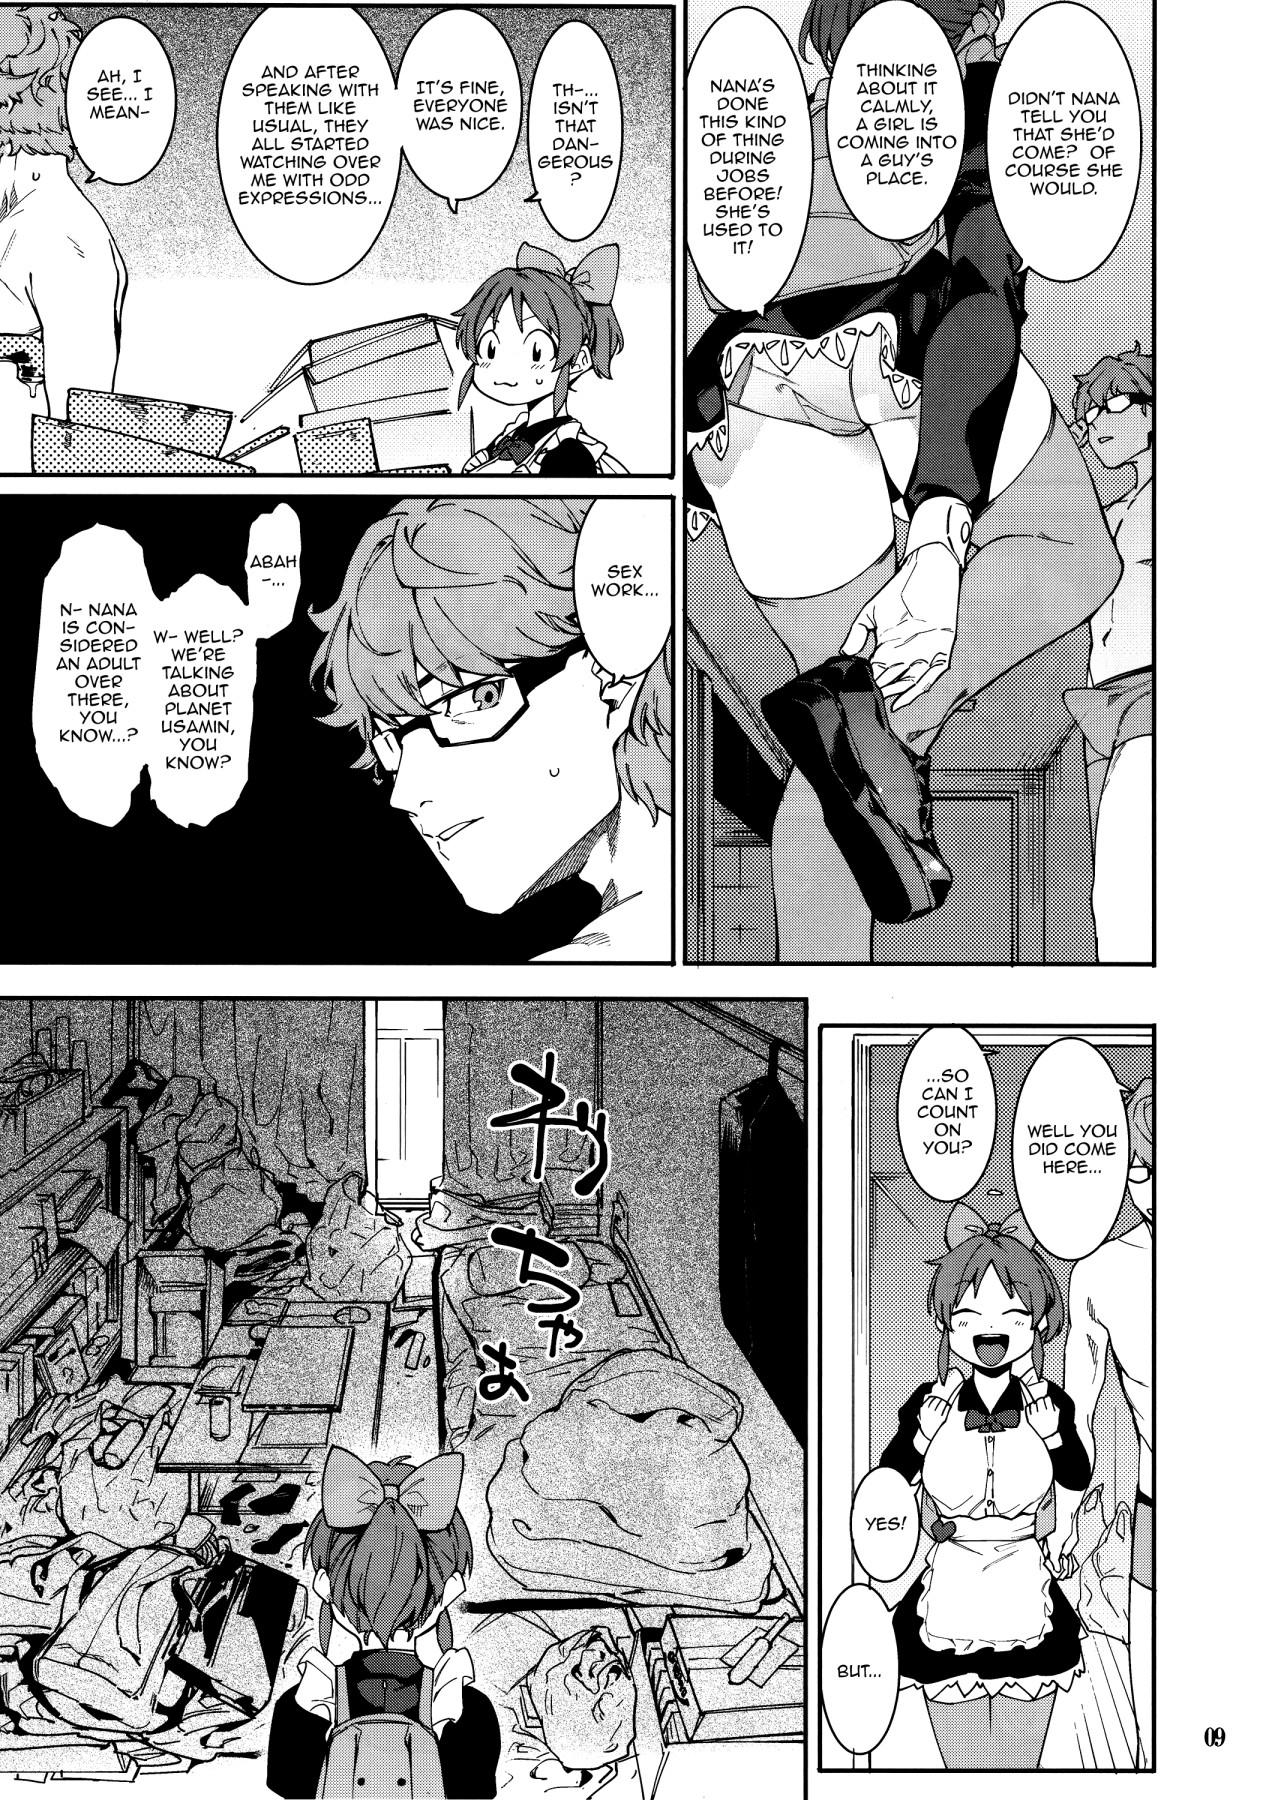 Jerking Tabegoro Bunny - The idolmaster Casal - Page 8